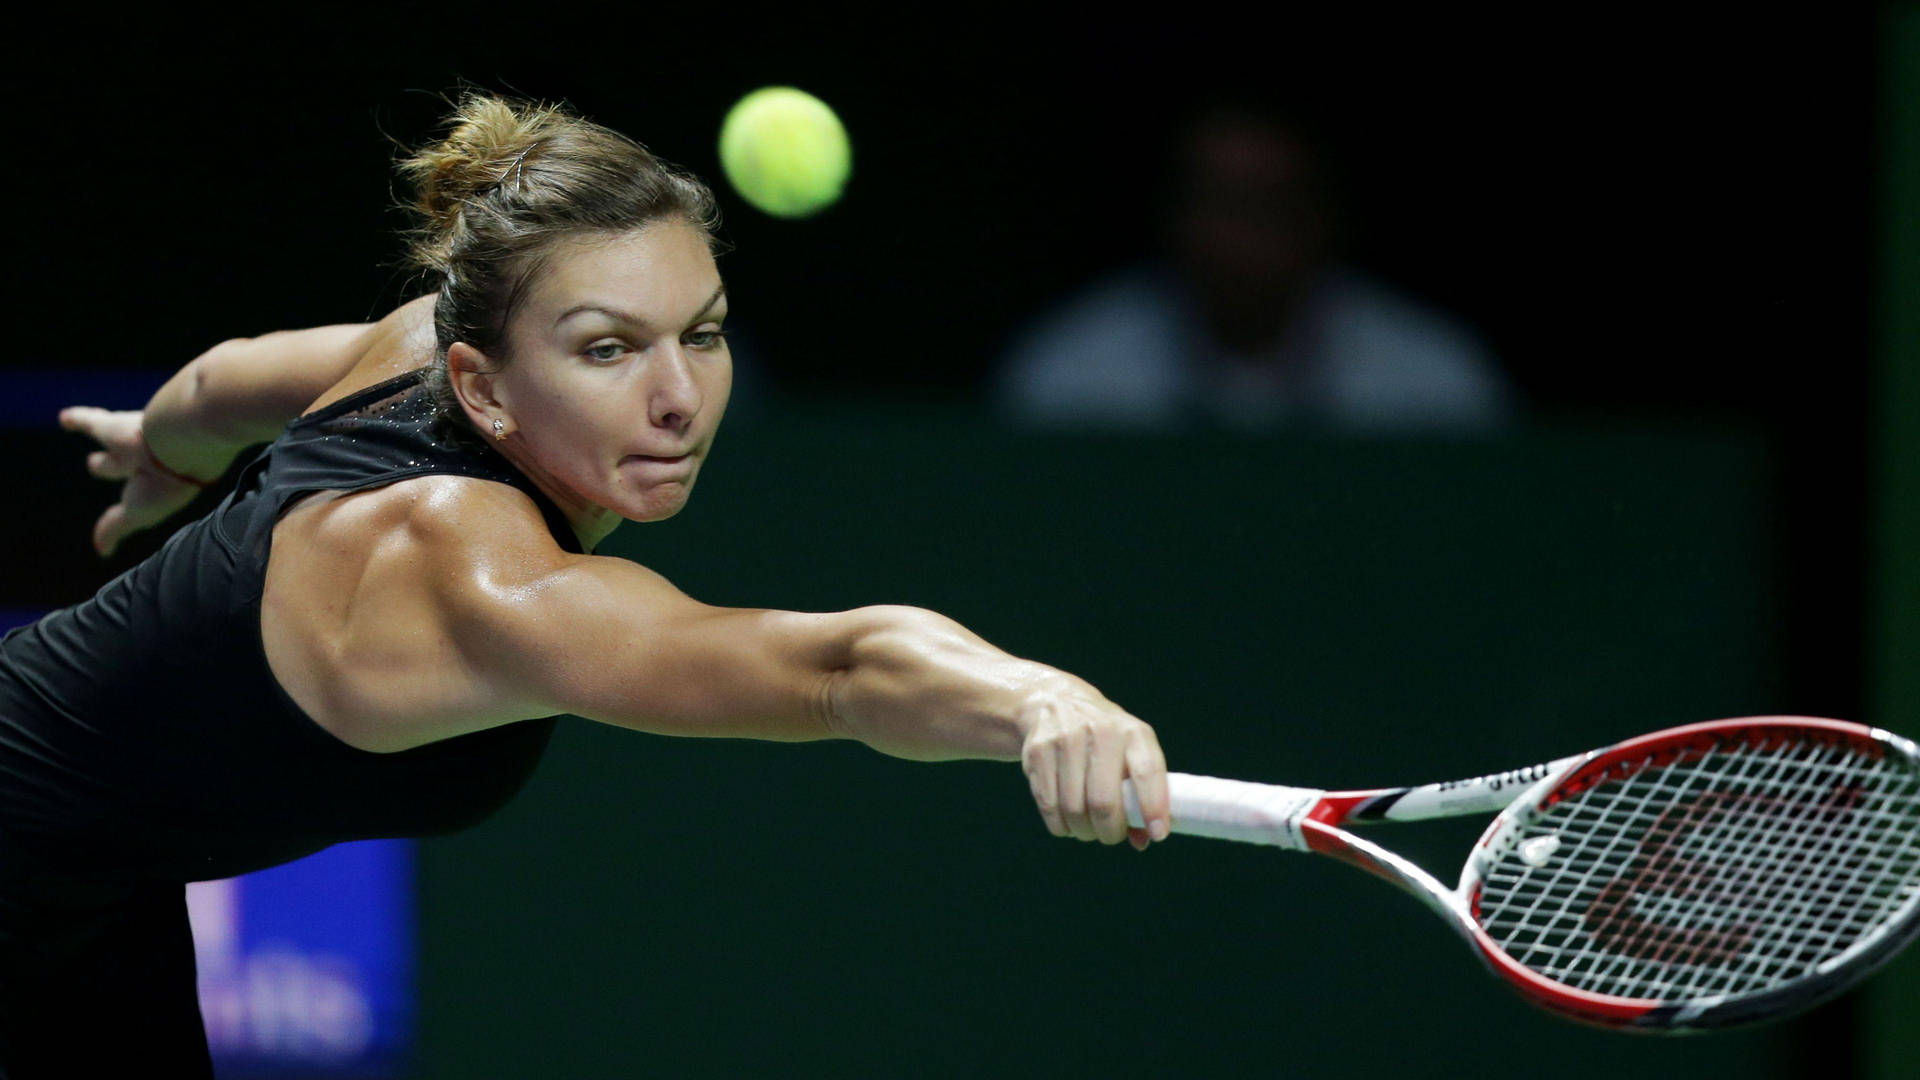 Simona Halep Fully Focused in the Tennis Court Wallpaper